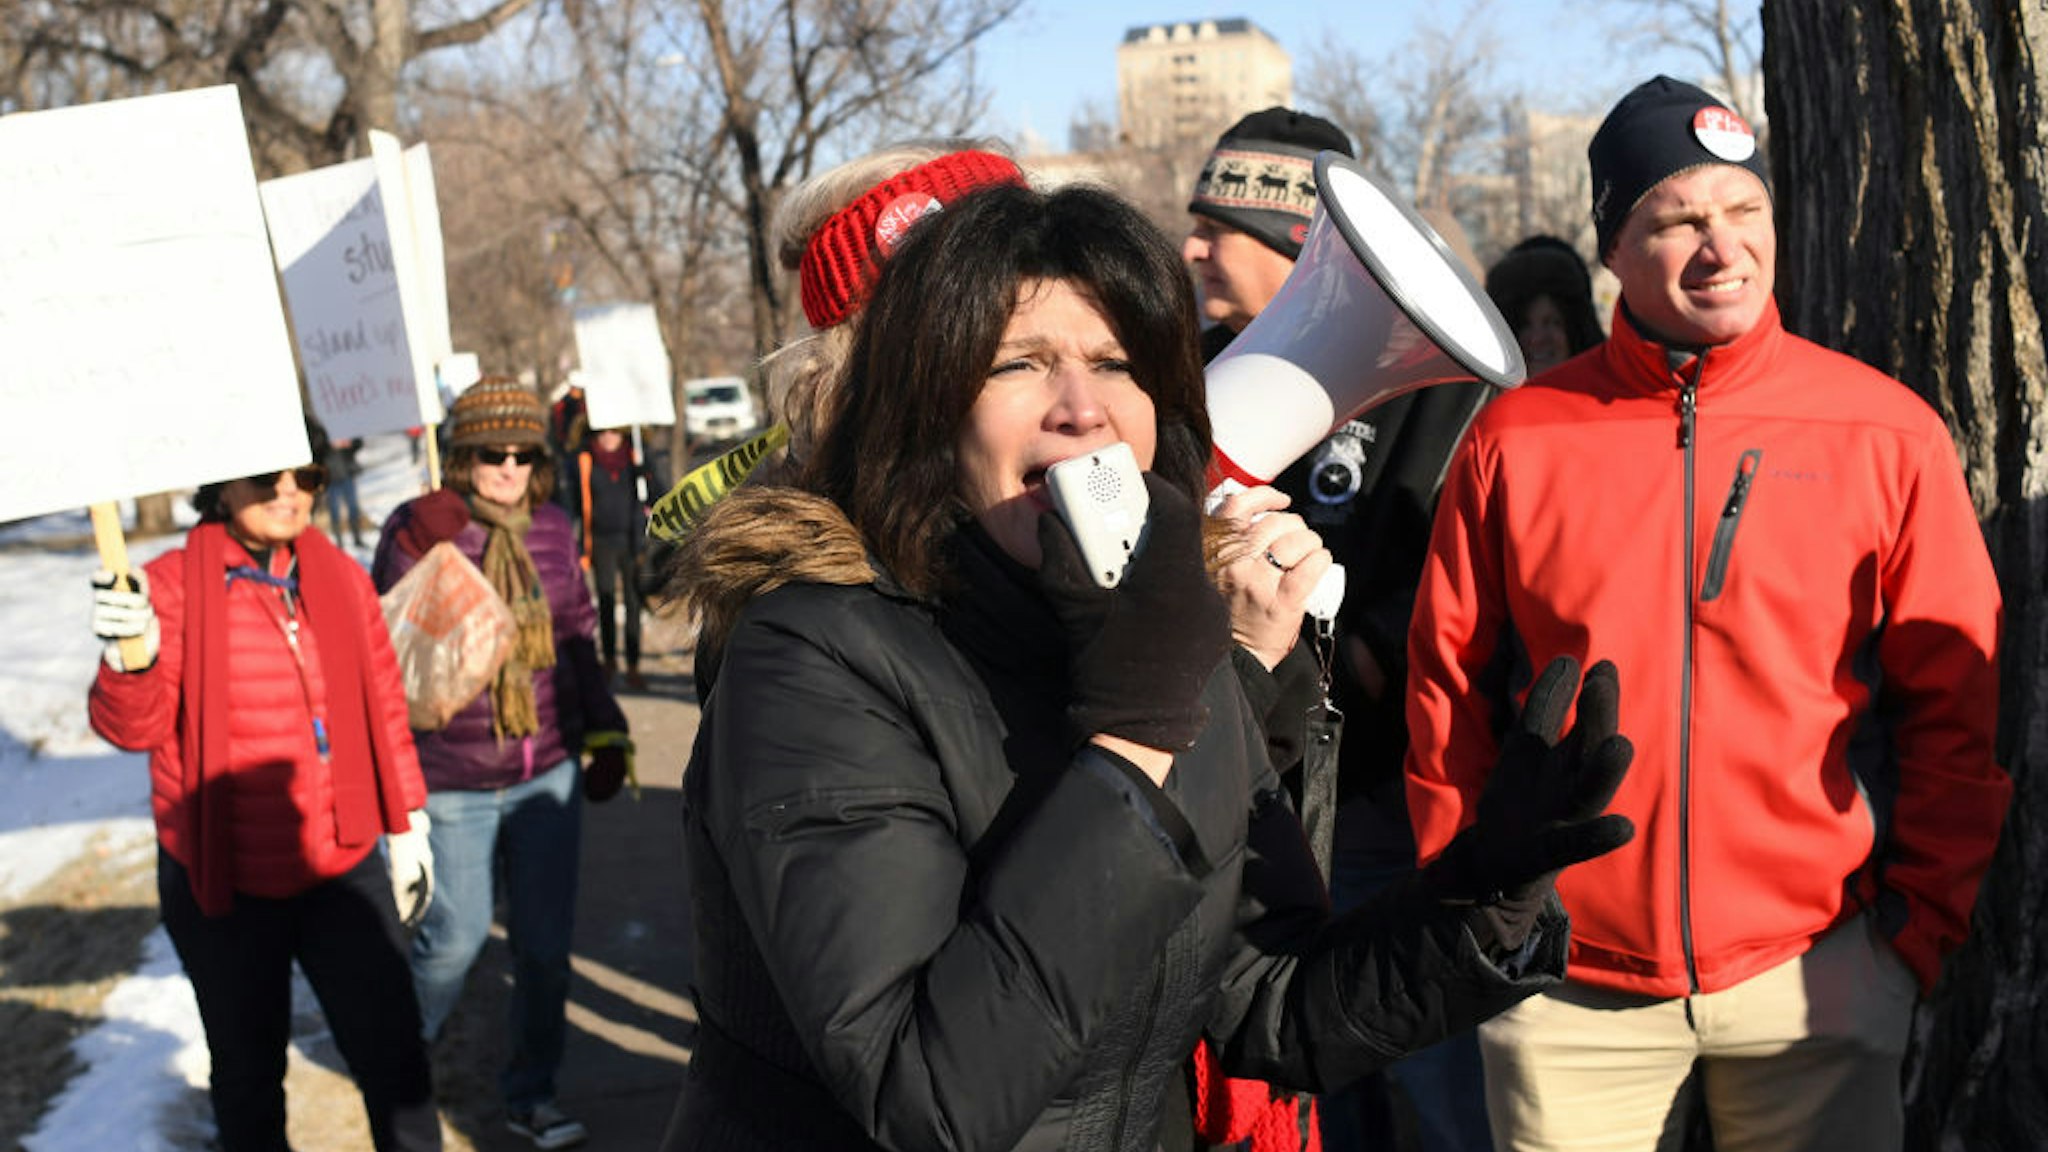 DENVER CO - FEBRUARY 11: Lily Eskelsen García, President of the National Education Association, joined Denver Public School teachers as they walk the picket lines outside West High School during day one of a strike for Denver Public School teachers on February 11, 2019 in Denver, Colorado.